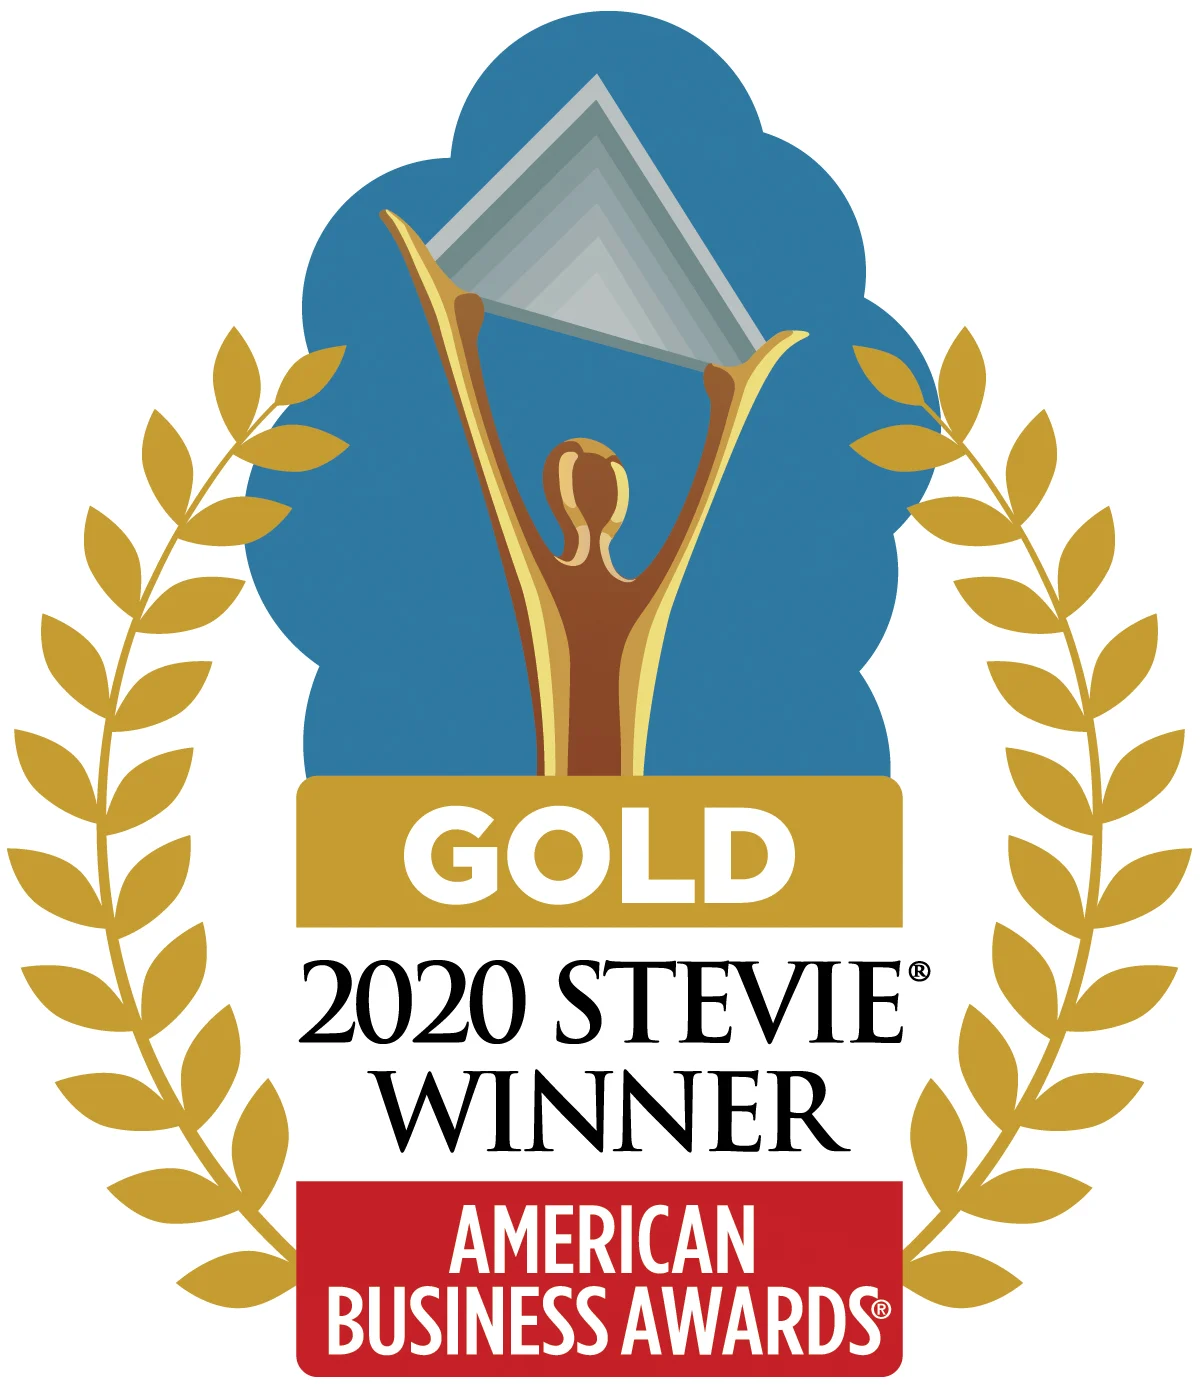 Logo for the Gold Stevie award that WilsonHCG won for its Fortune 500 Employment Brand report